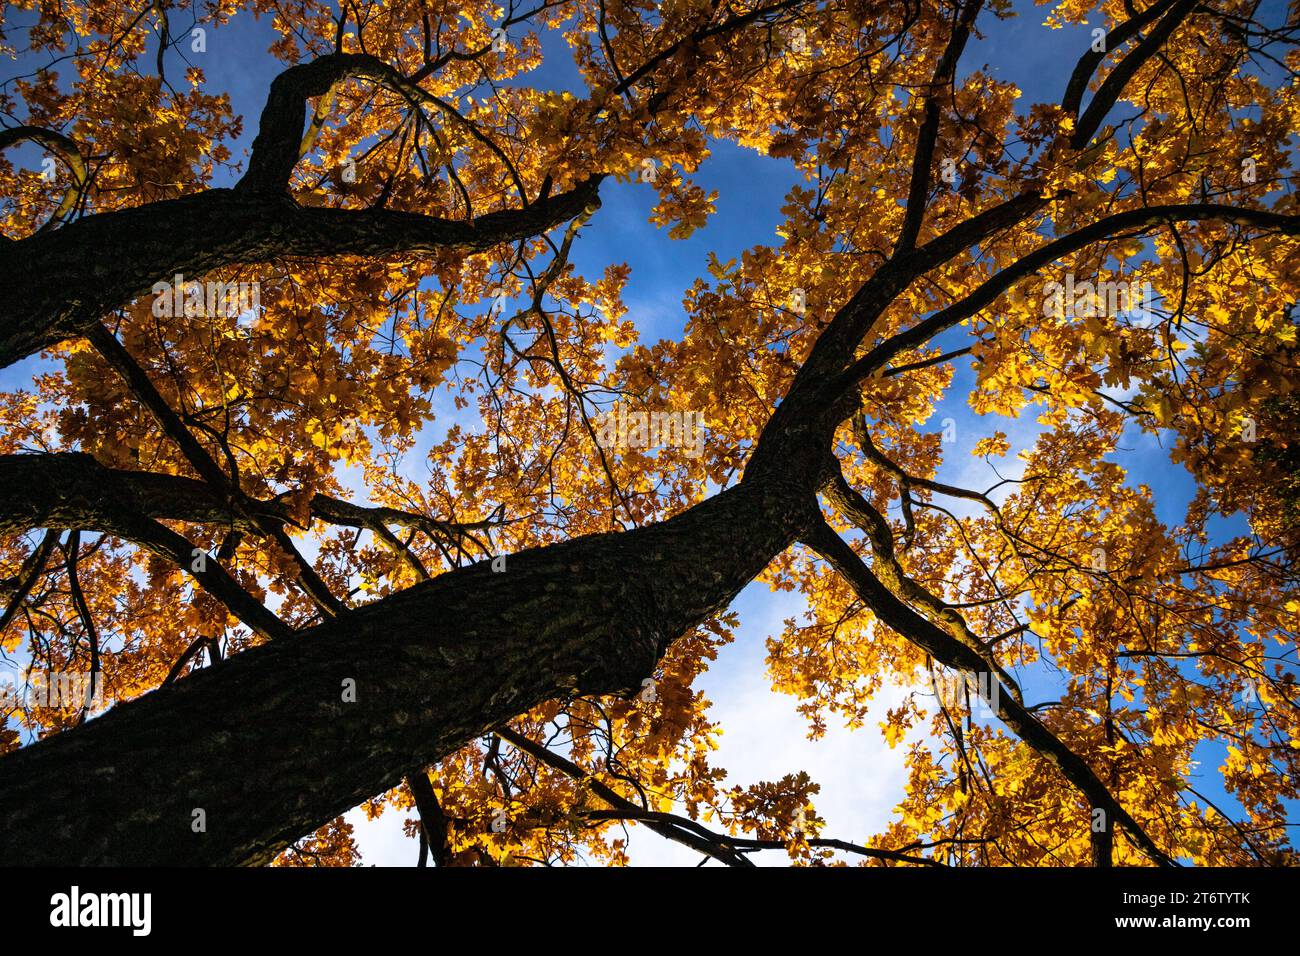 Magic tree 13.11.2023 Bialystok Poland. Golden crown of magical trees in sunny autumn. Stock Photo